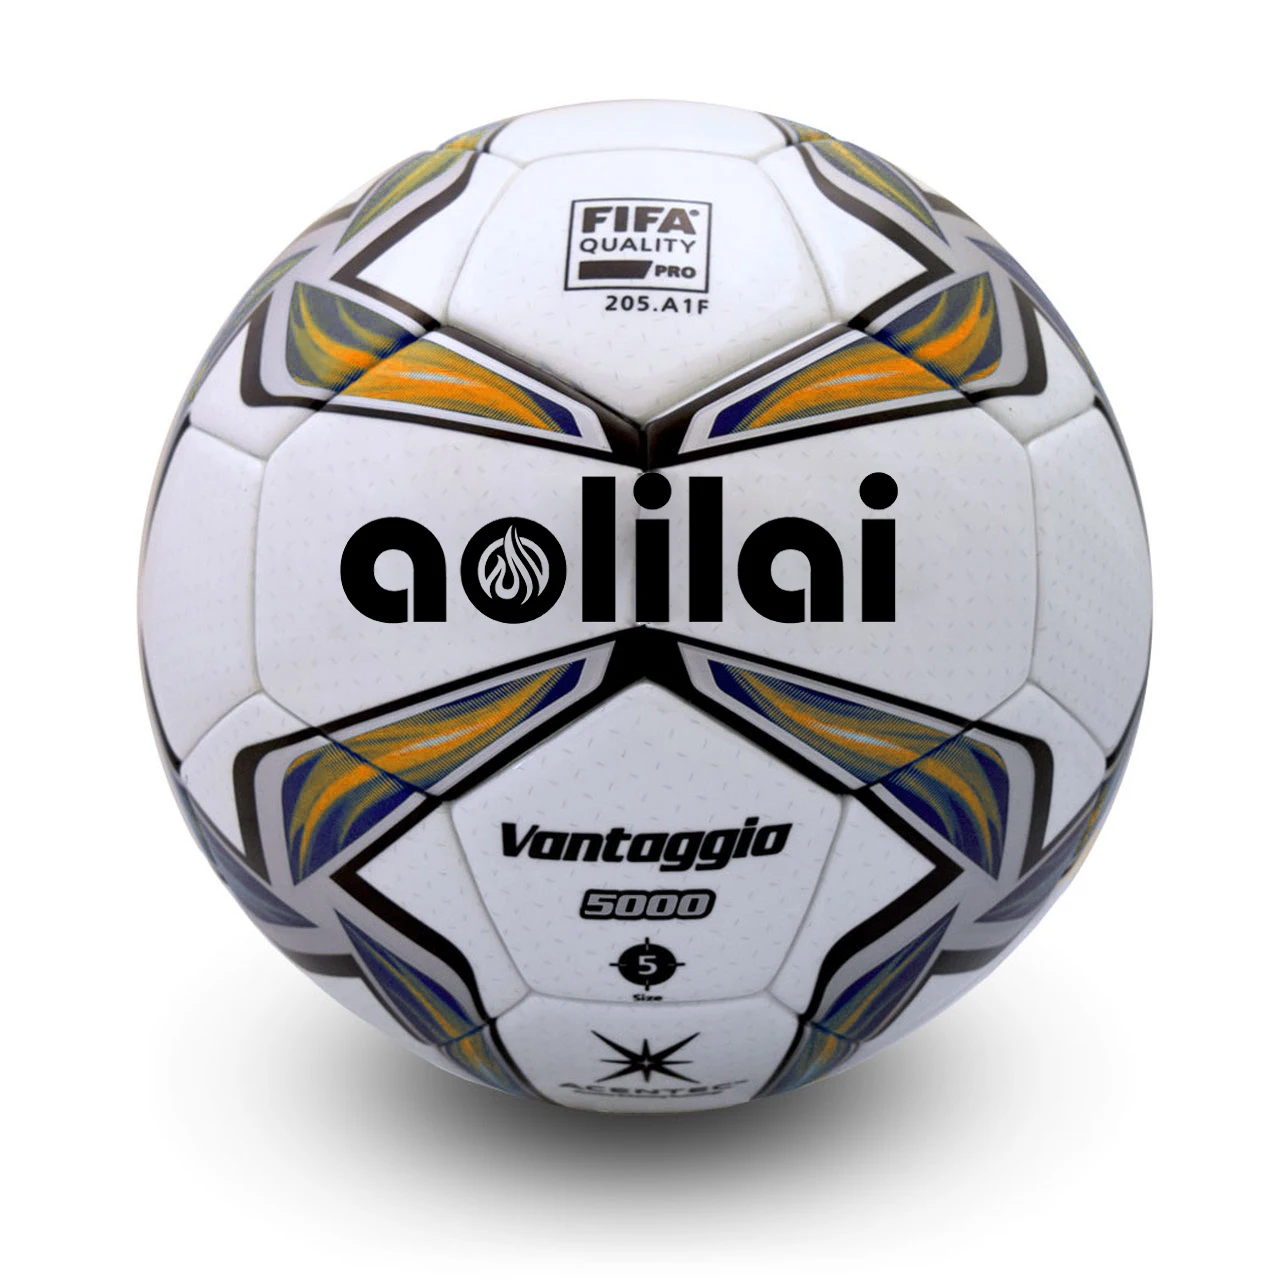 

BALONES DE Futbol wholesale smooth surface size 5 size 4 inflatable aolilai brand thermal bonded soccer ball football balls, Orange, blue, green...